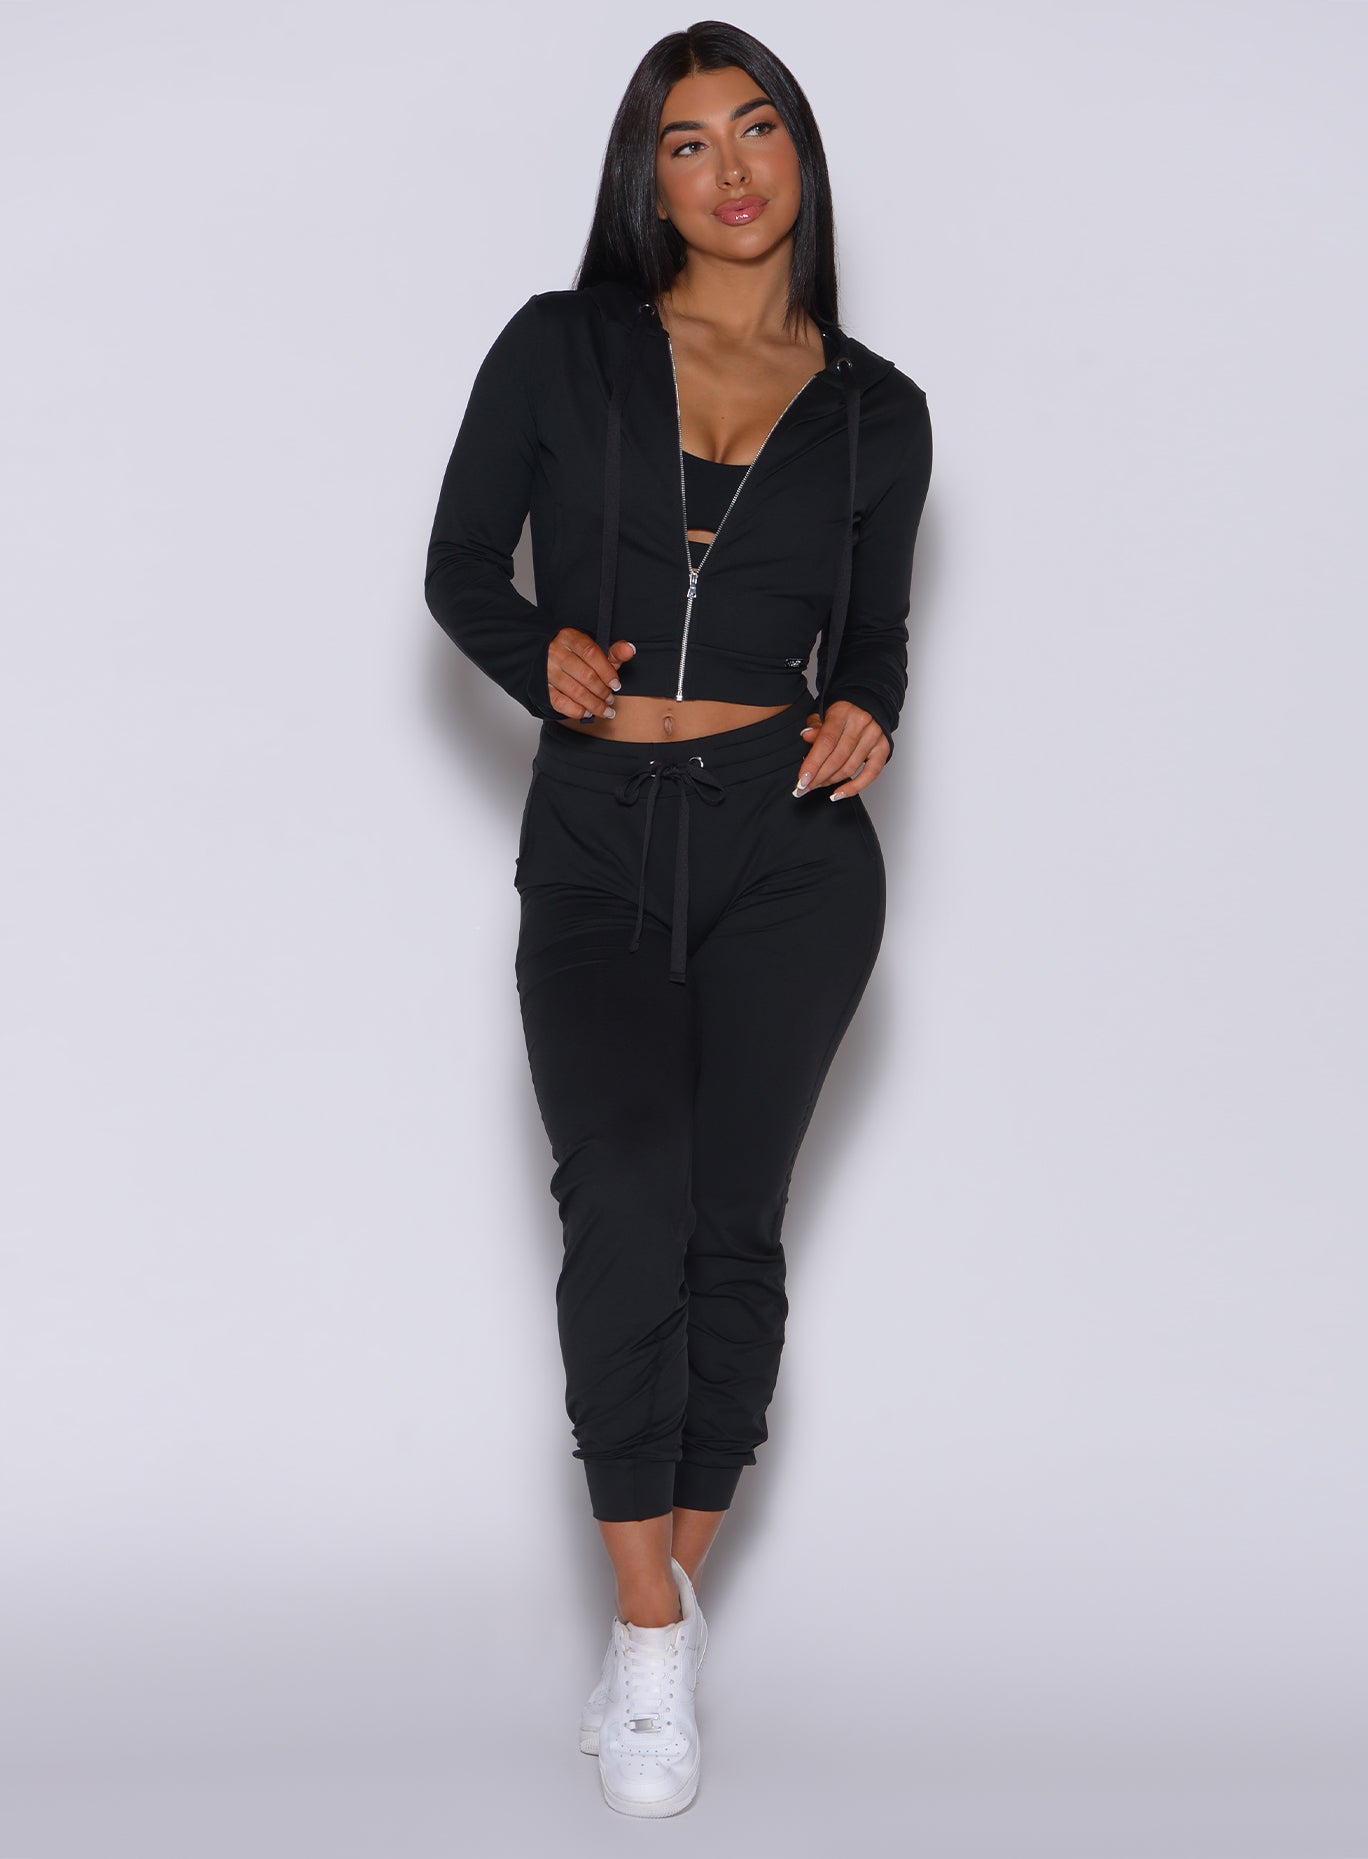 front view of model wearing an all two piece black lounge set